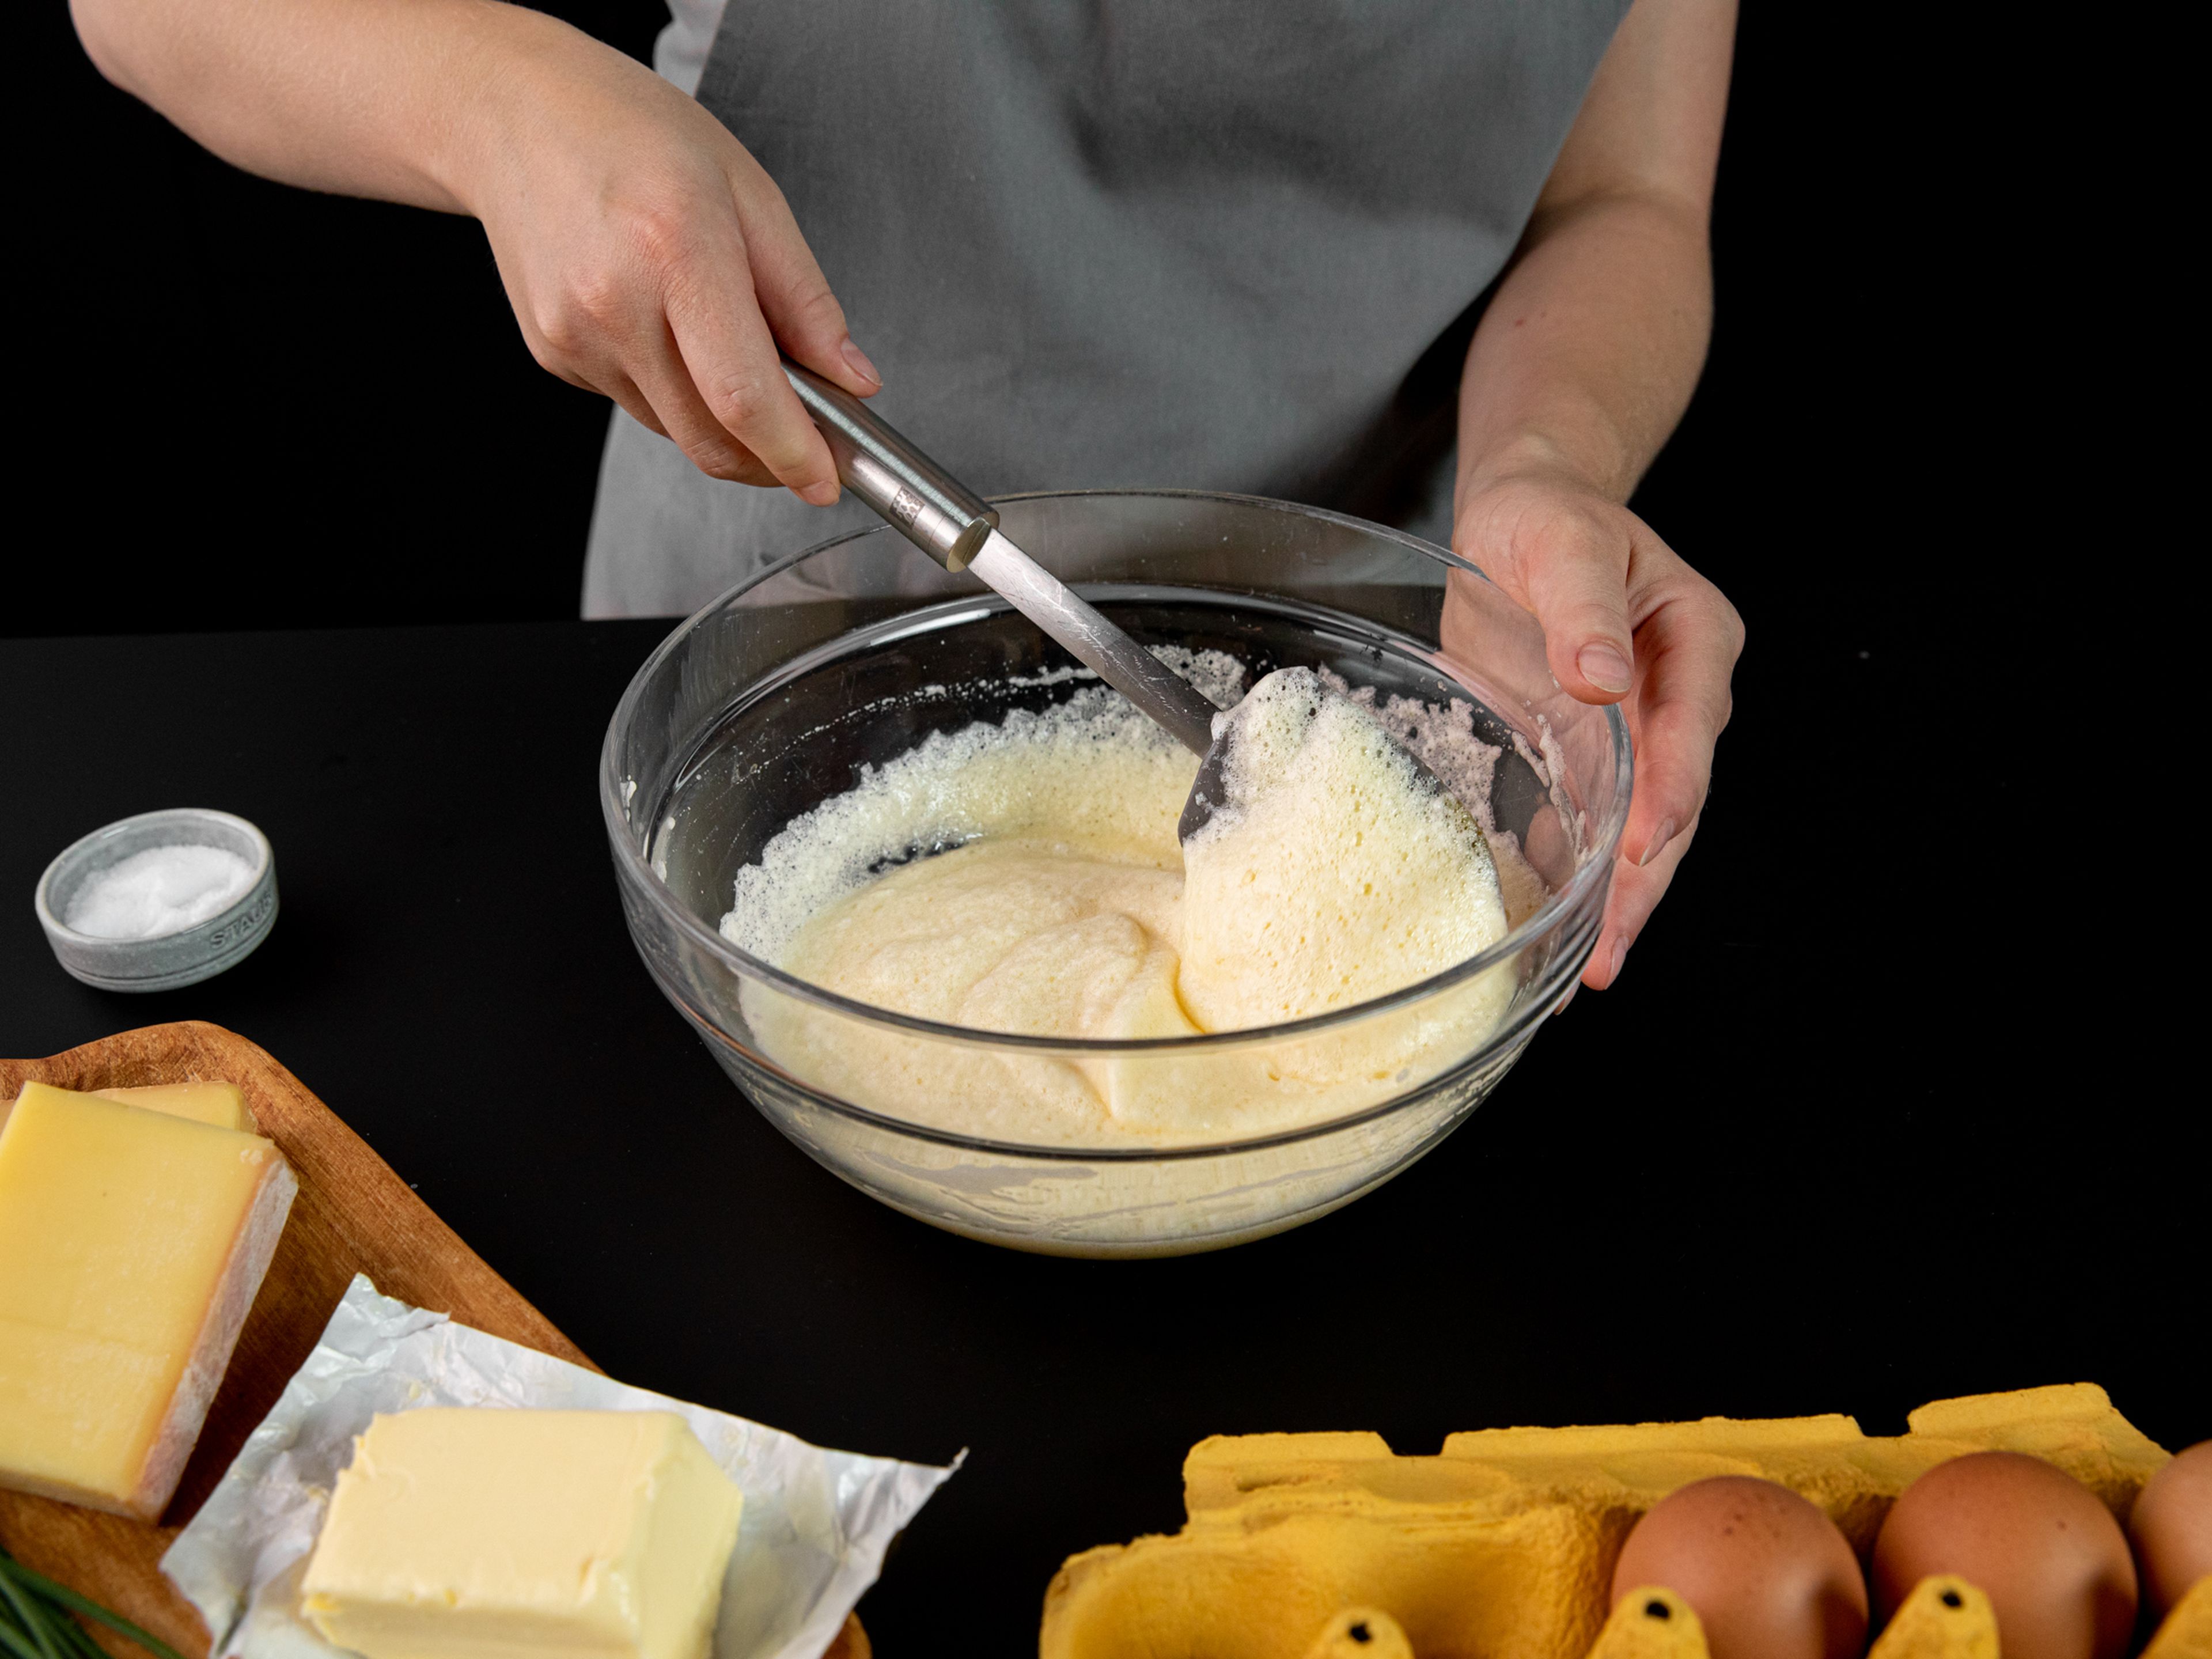 Whisk in half the egg whites to the yolks, then fold in remaining egg whites with a rubber spatula.